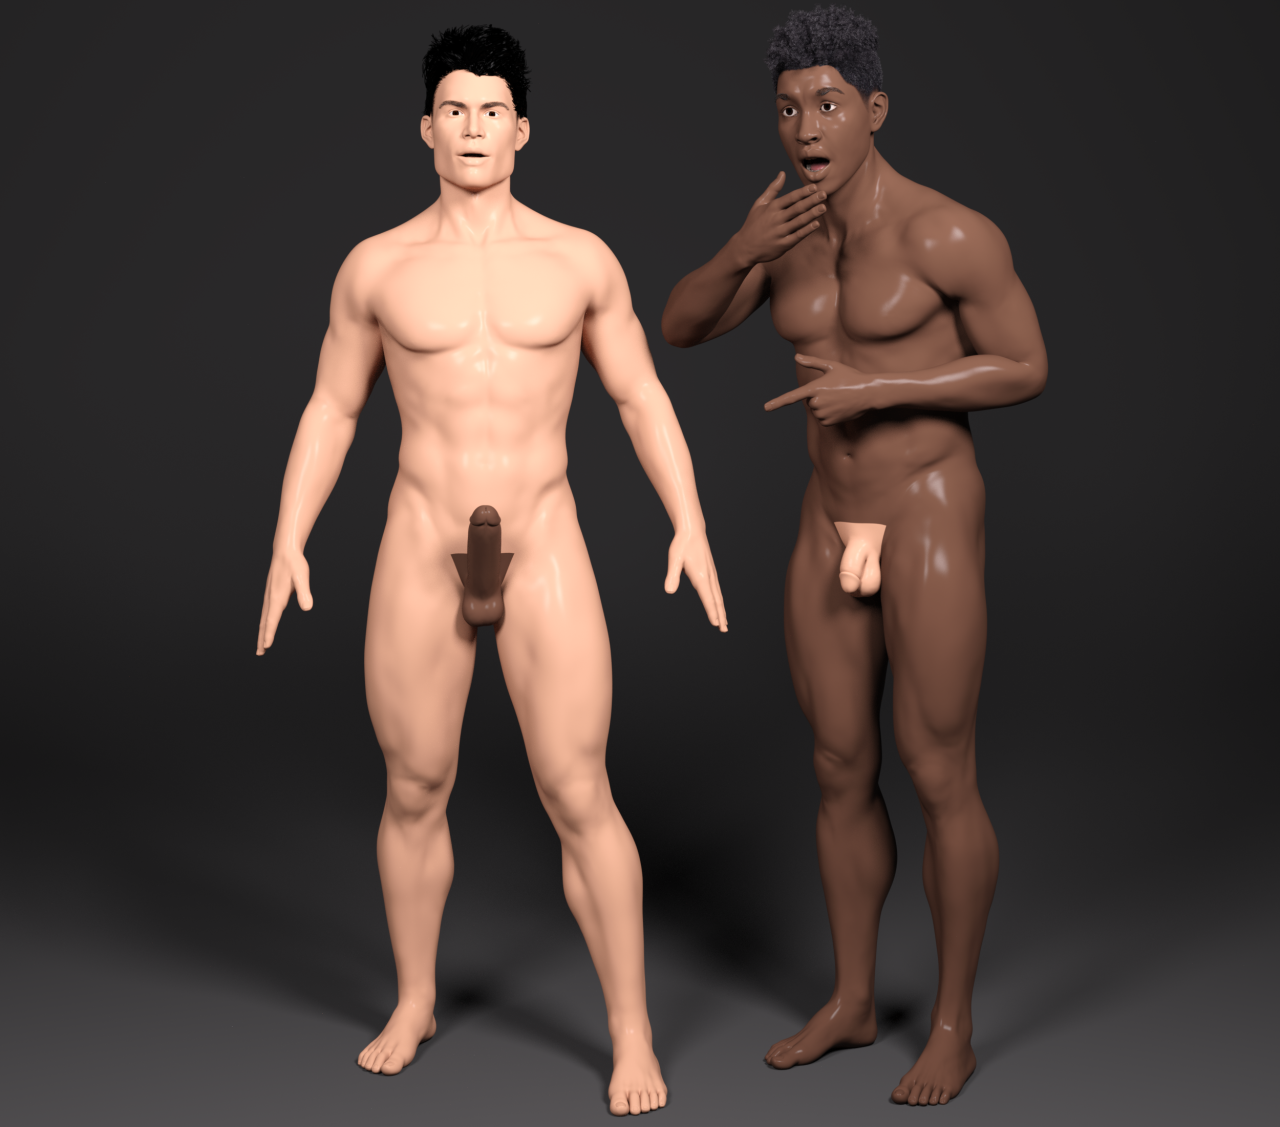 shweikytumb:Not satisfied with your mannequins dicks? Switch them around!